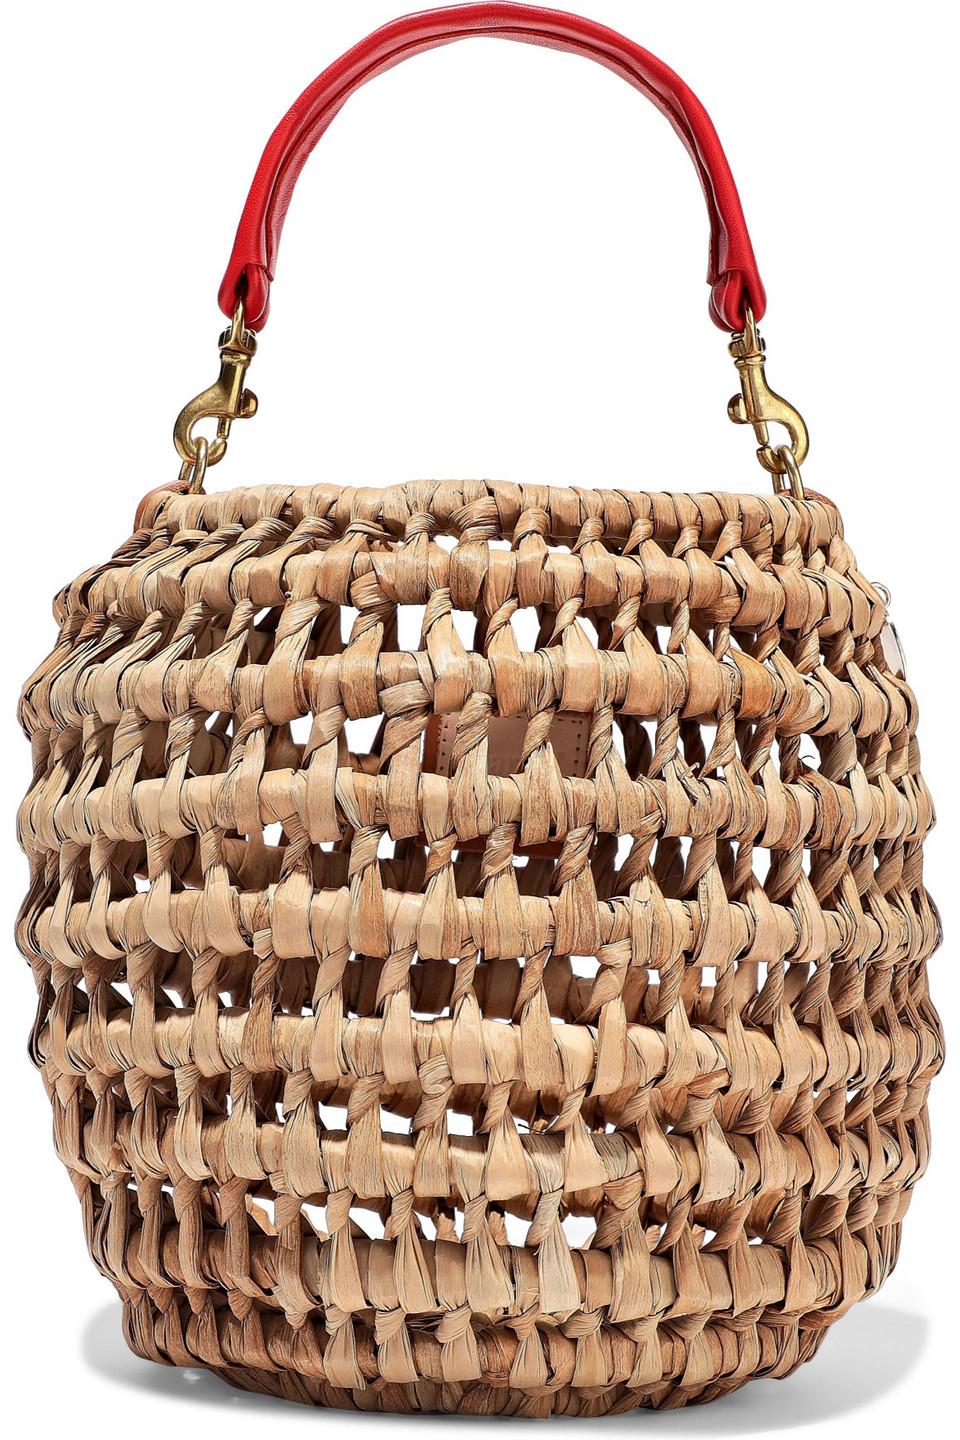 Clare V. Pot De Miel Leather-trimmed Woven Straw Tote in Natural